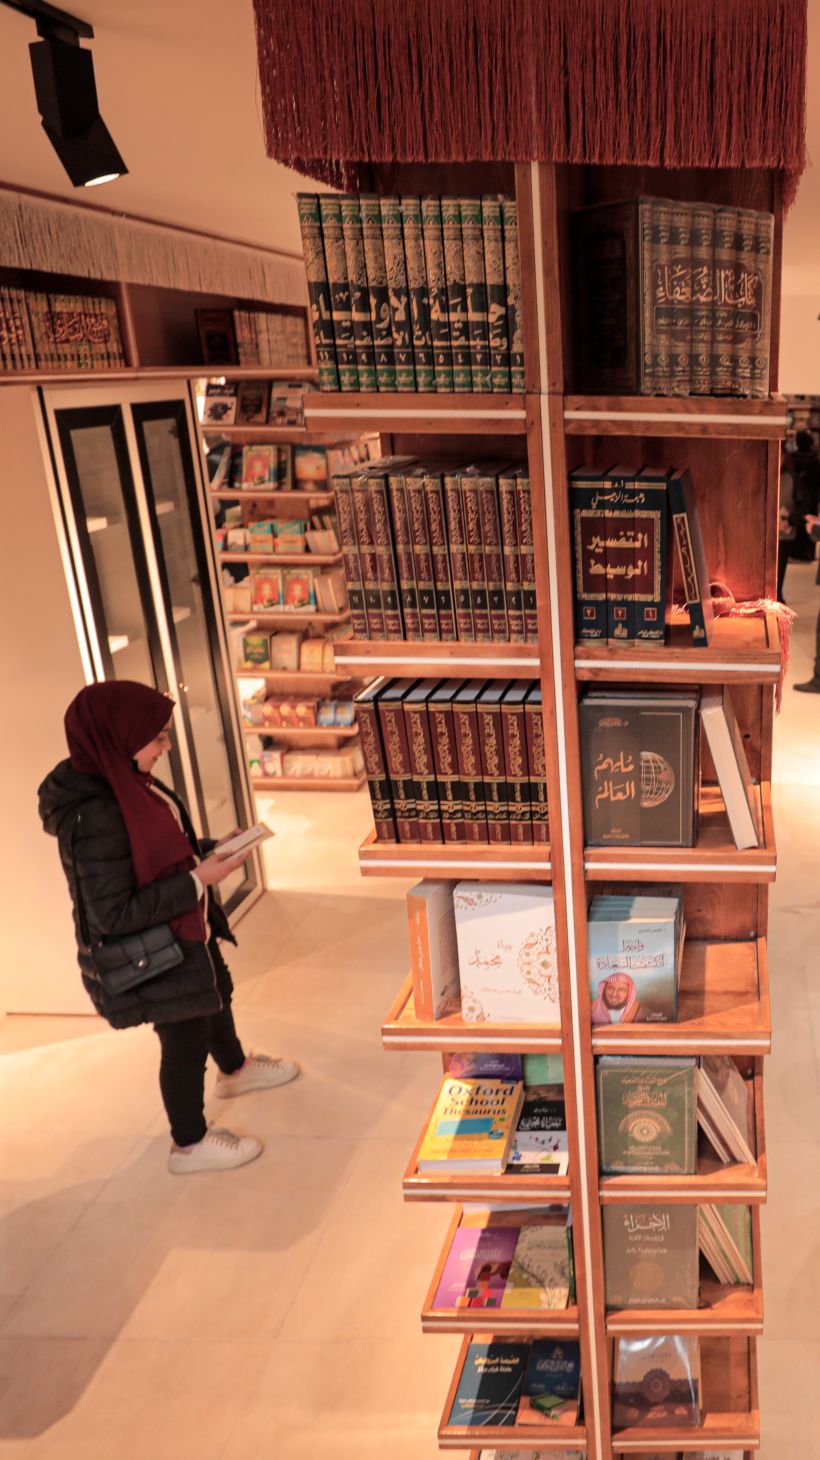 People browse in a bookstore